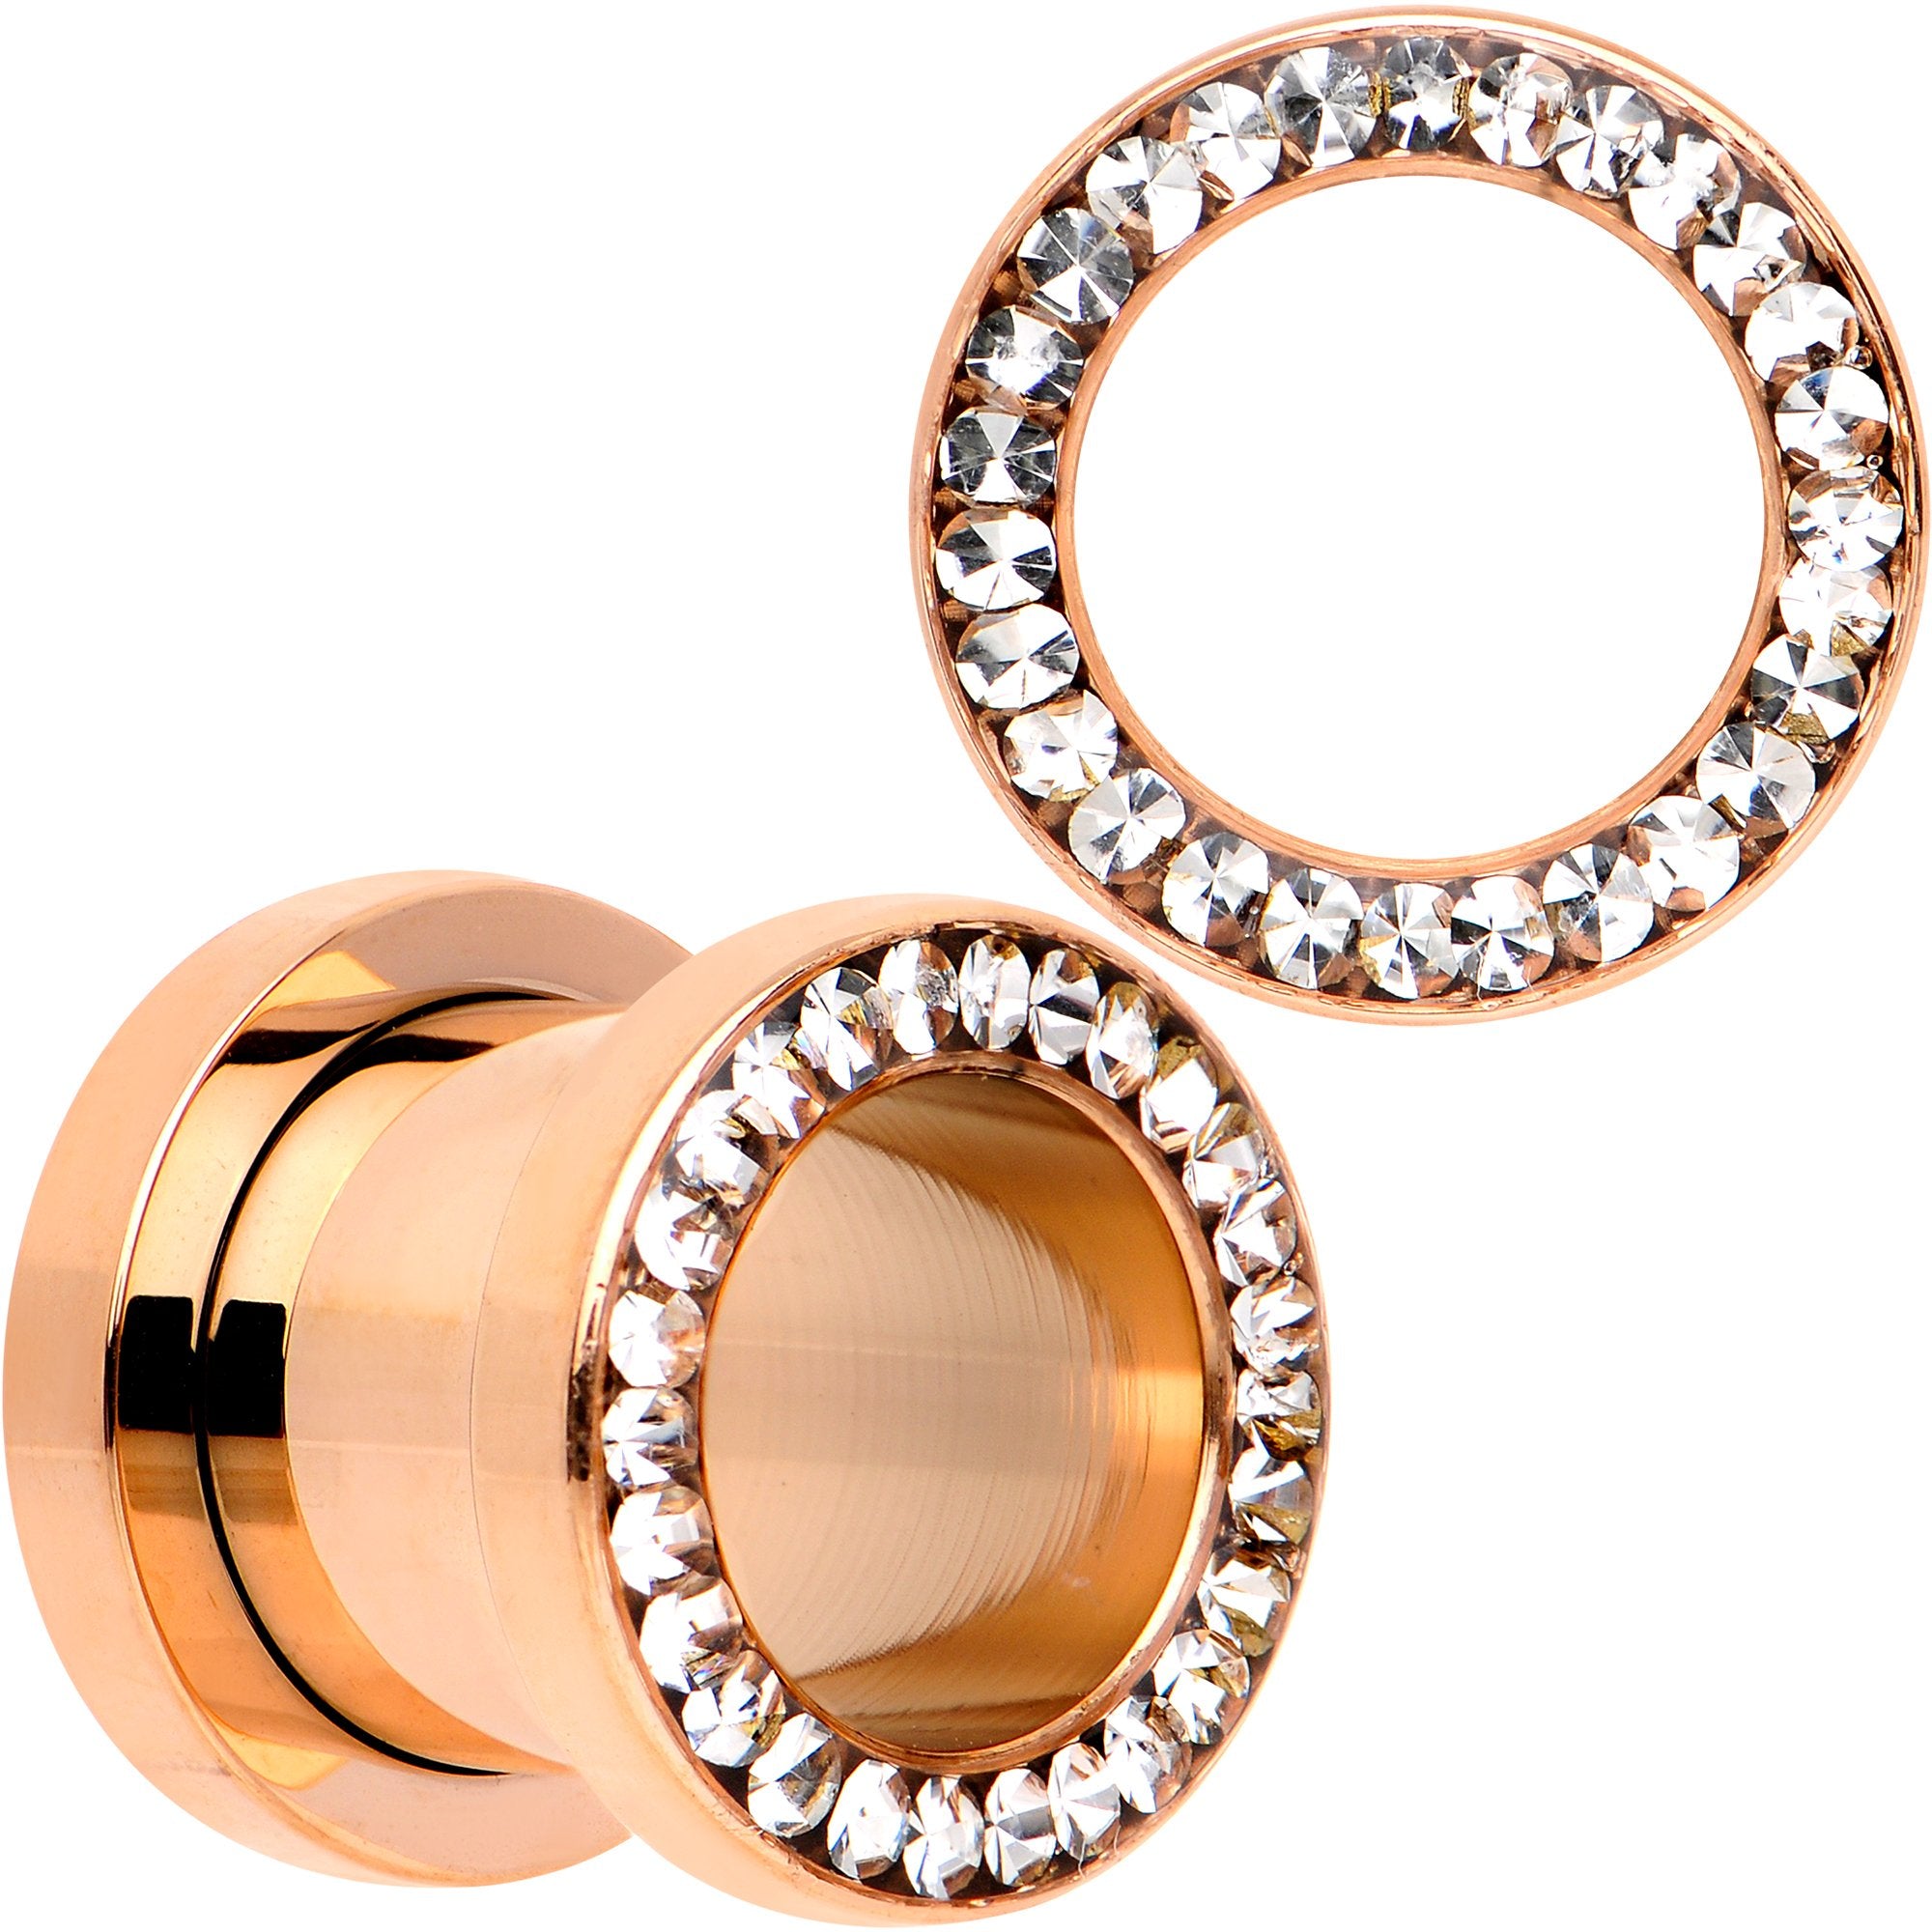 Clear CZ Gem Rose Gold PVD Bling Screw Fit Tunnel Plug Set 3mm to 16mm